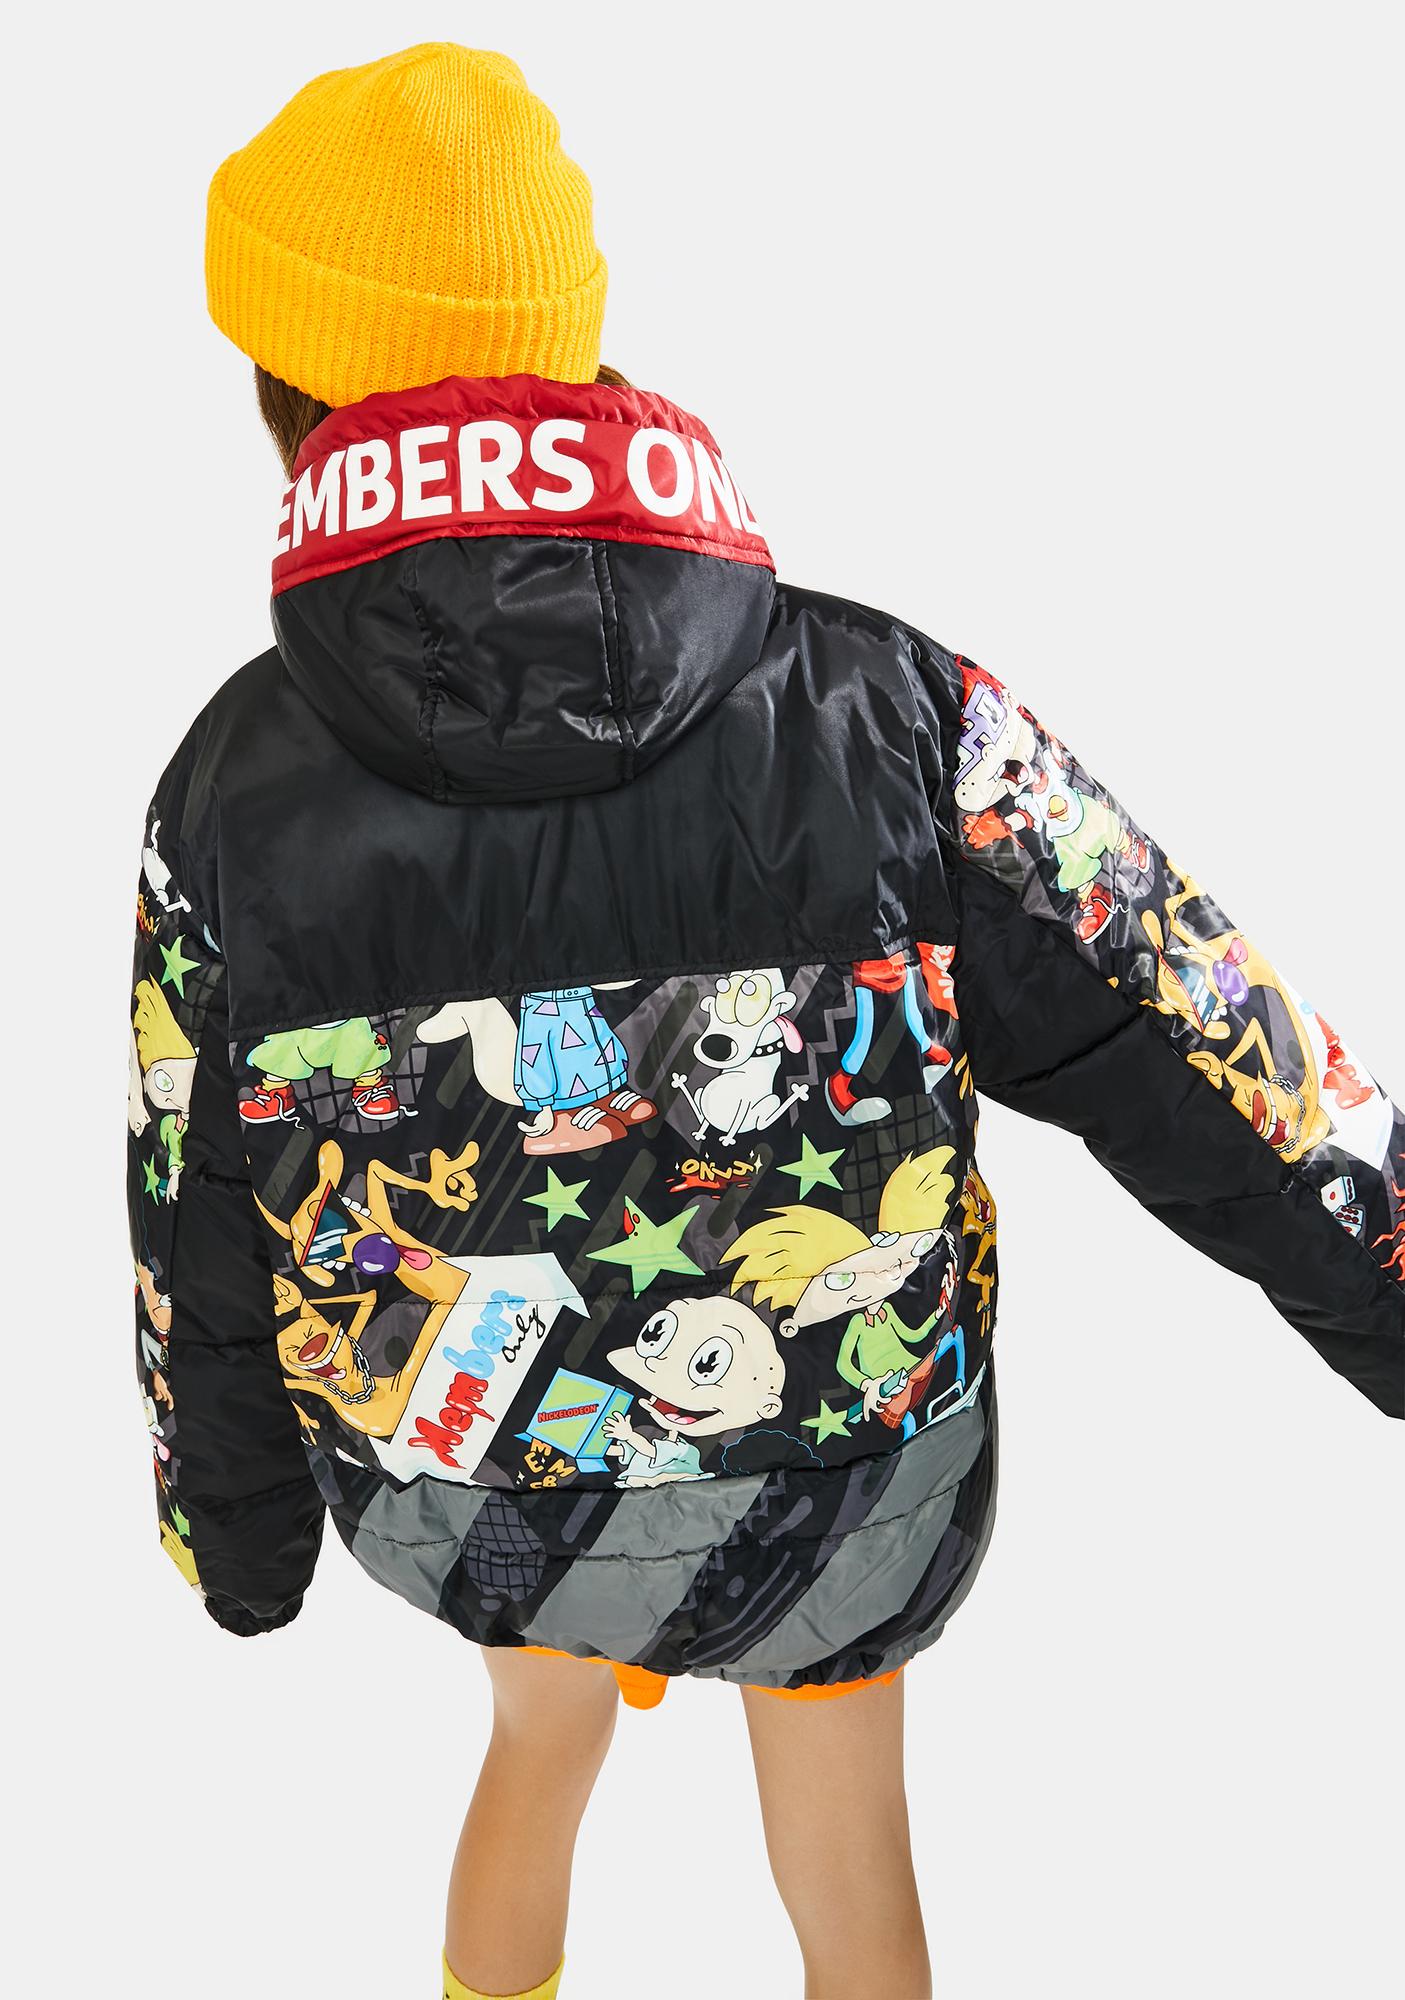 Members Only Nickelodeon Puffer Jacket | Dolls Kill